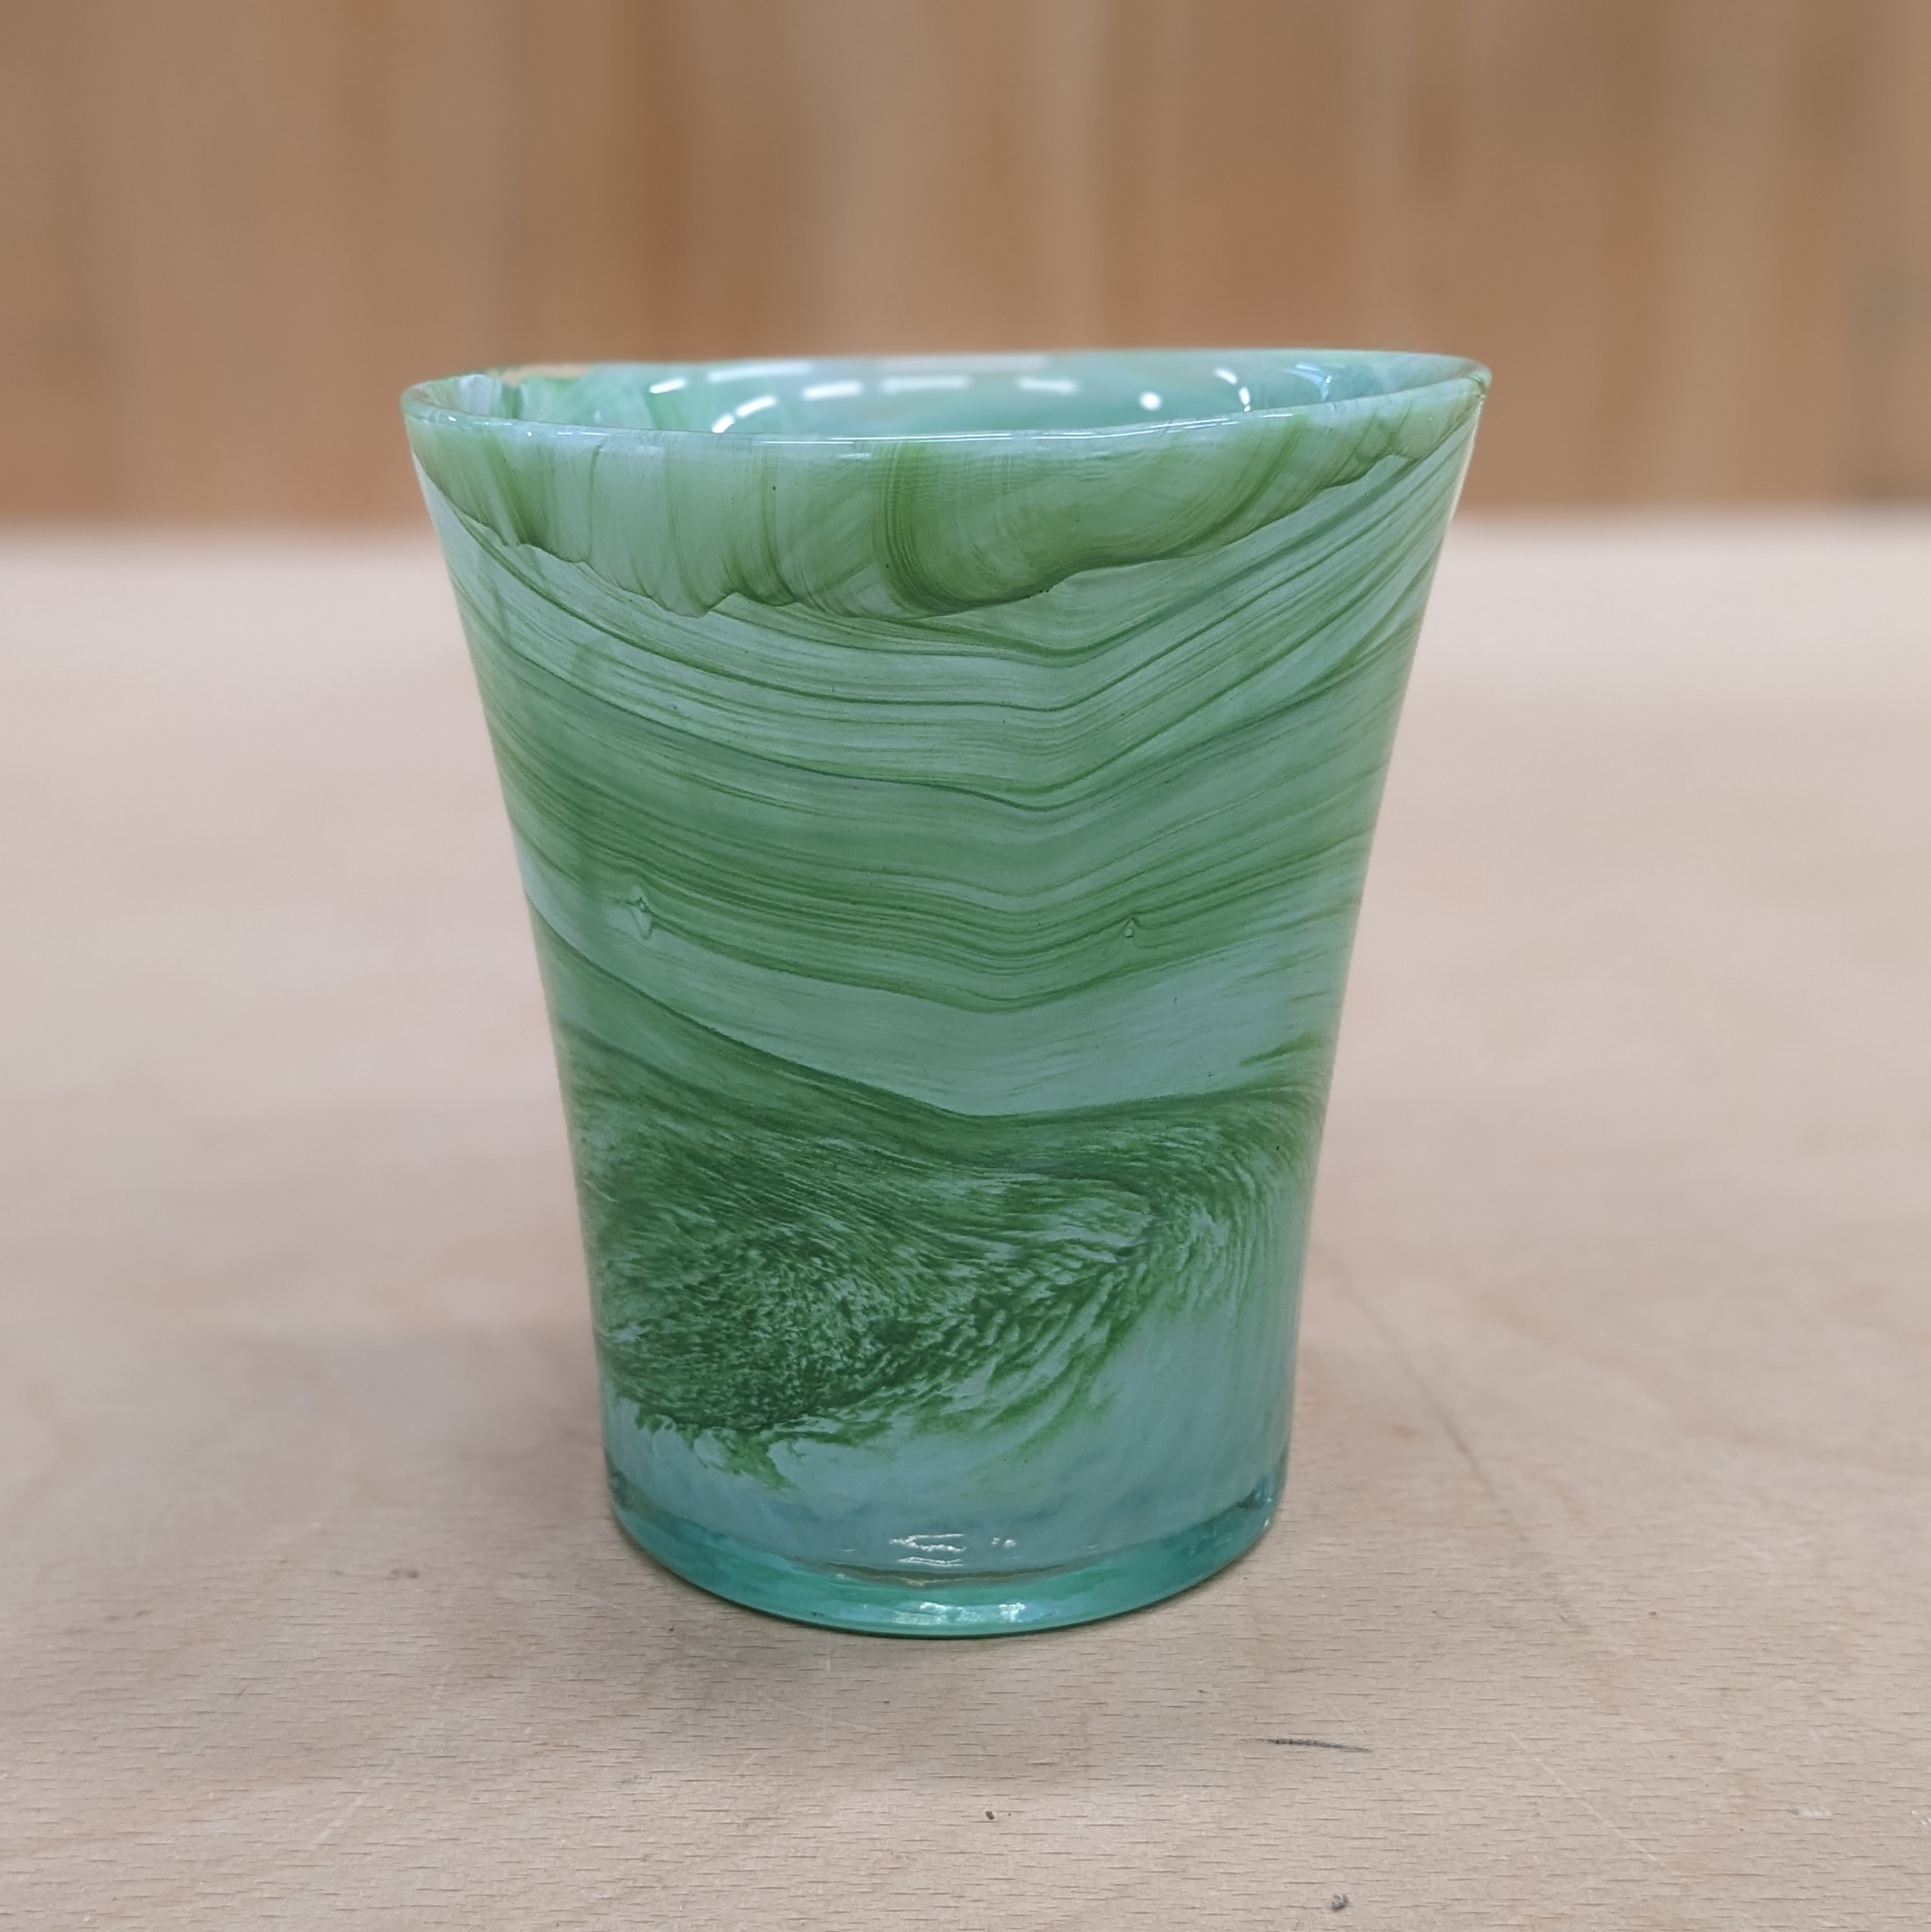 Green marbled glass vase swirl pattern design main picture